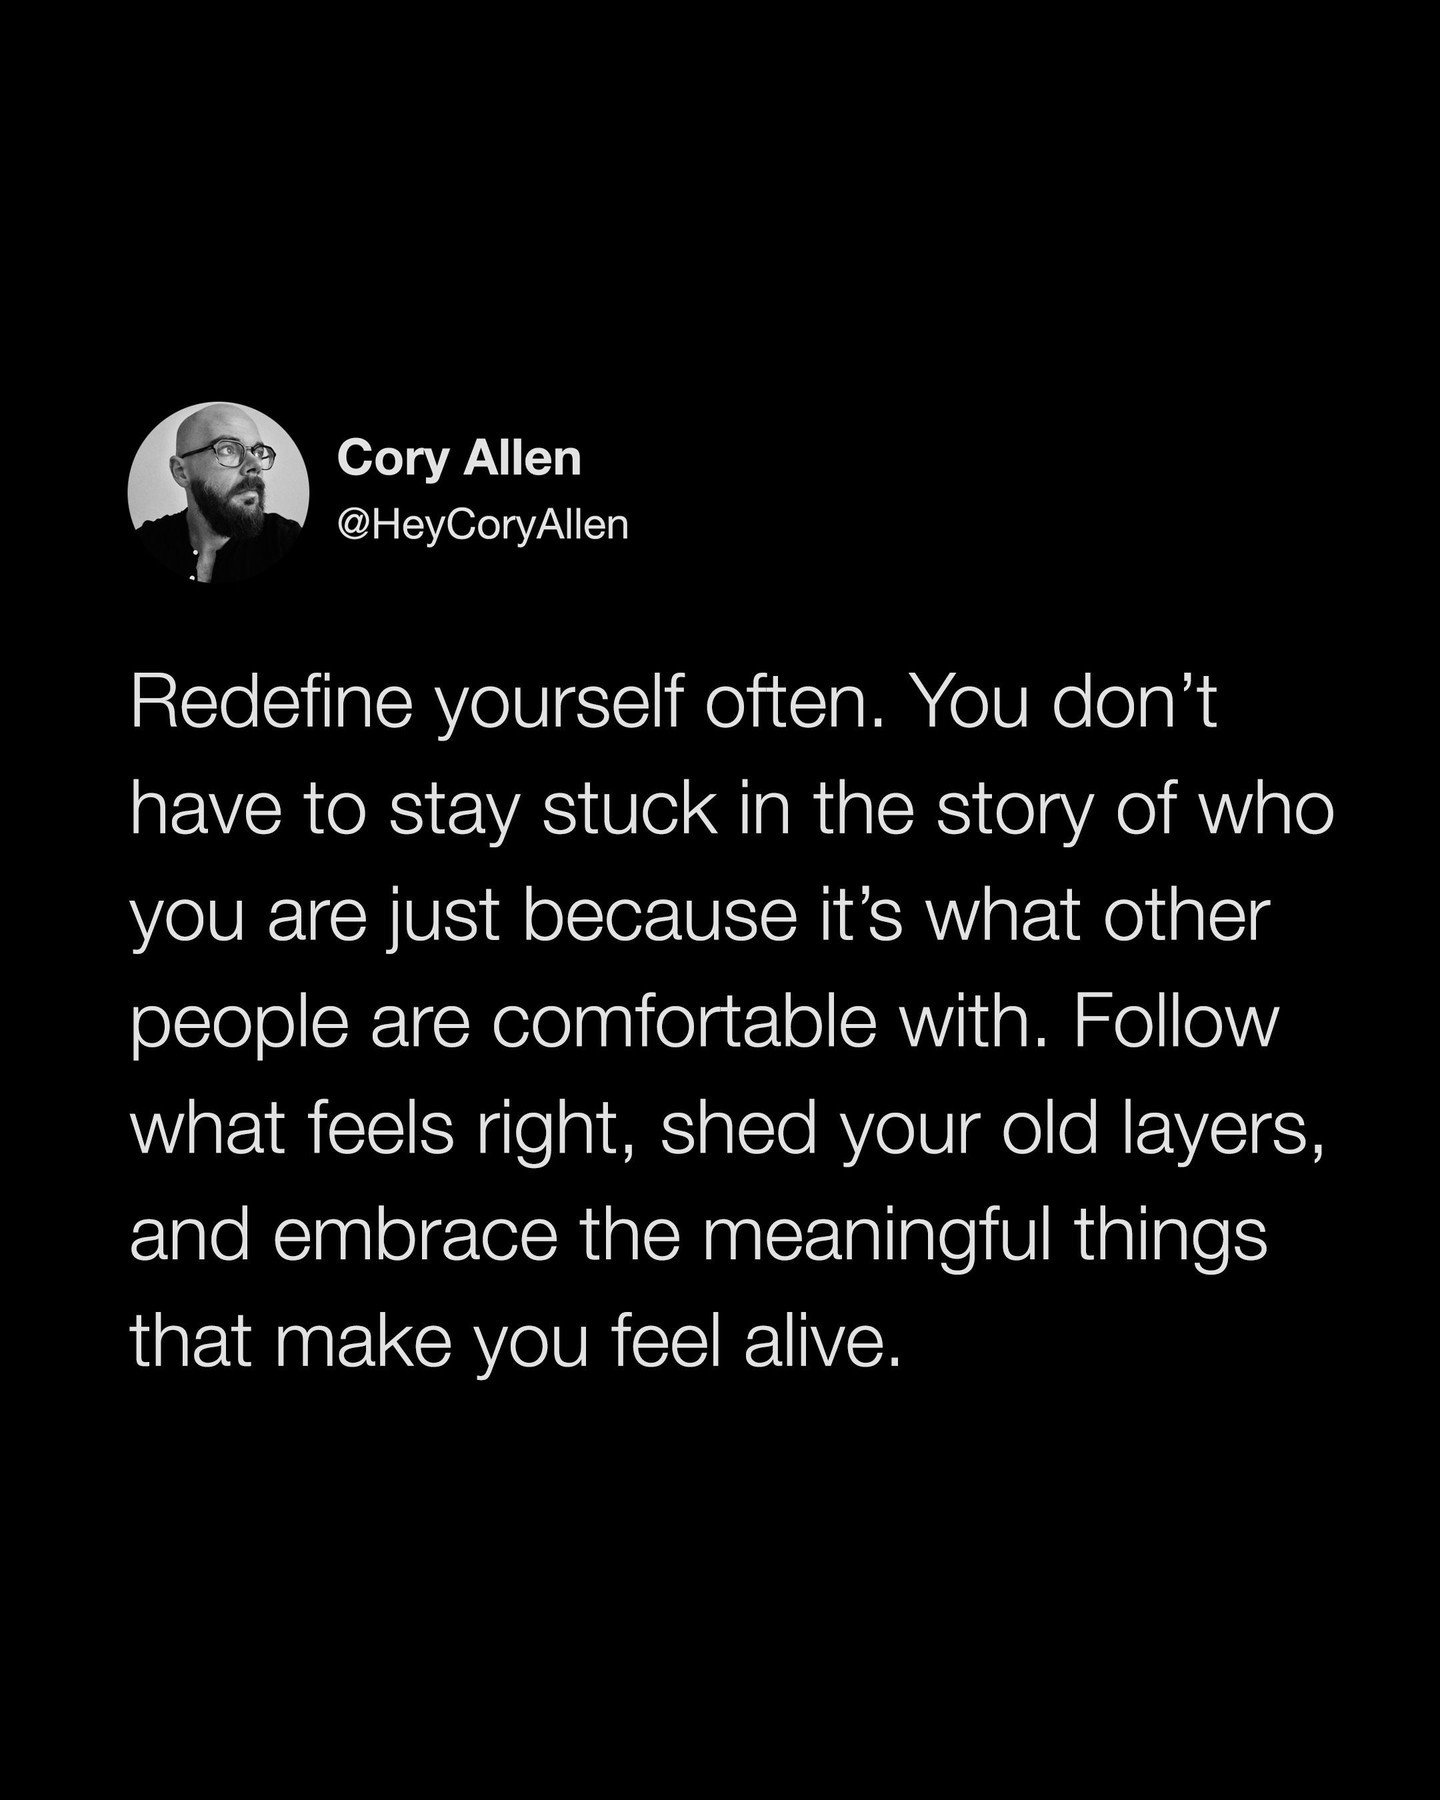 My new book, Brave New You is available for preorder! Comment &quot;brave&quot; on this post and I'll DM you a preorder link and you can get your free bonus 🙏🏻 This quote is taken directly from one of the chapters.

@heycoryallen: Redefine yourself